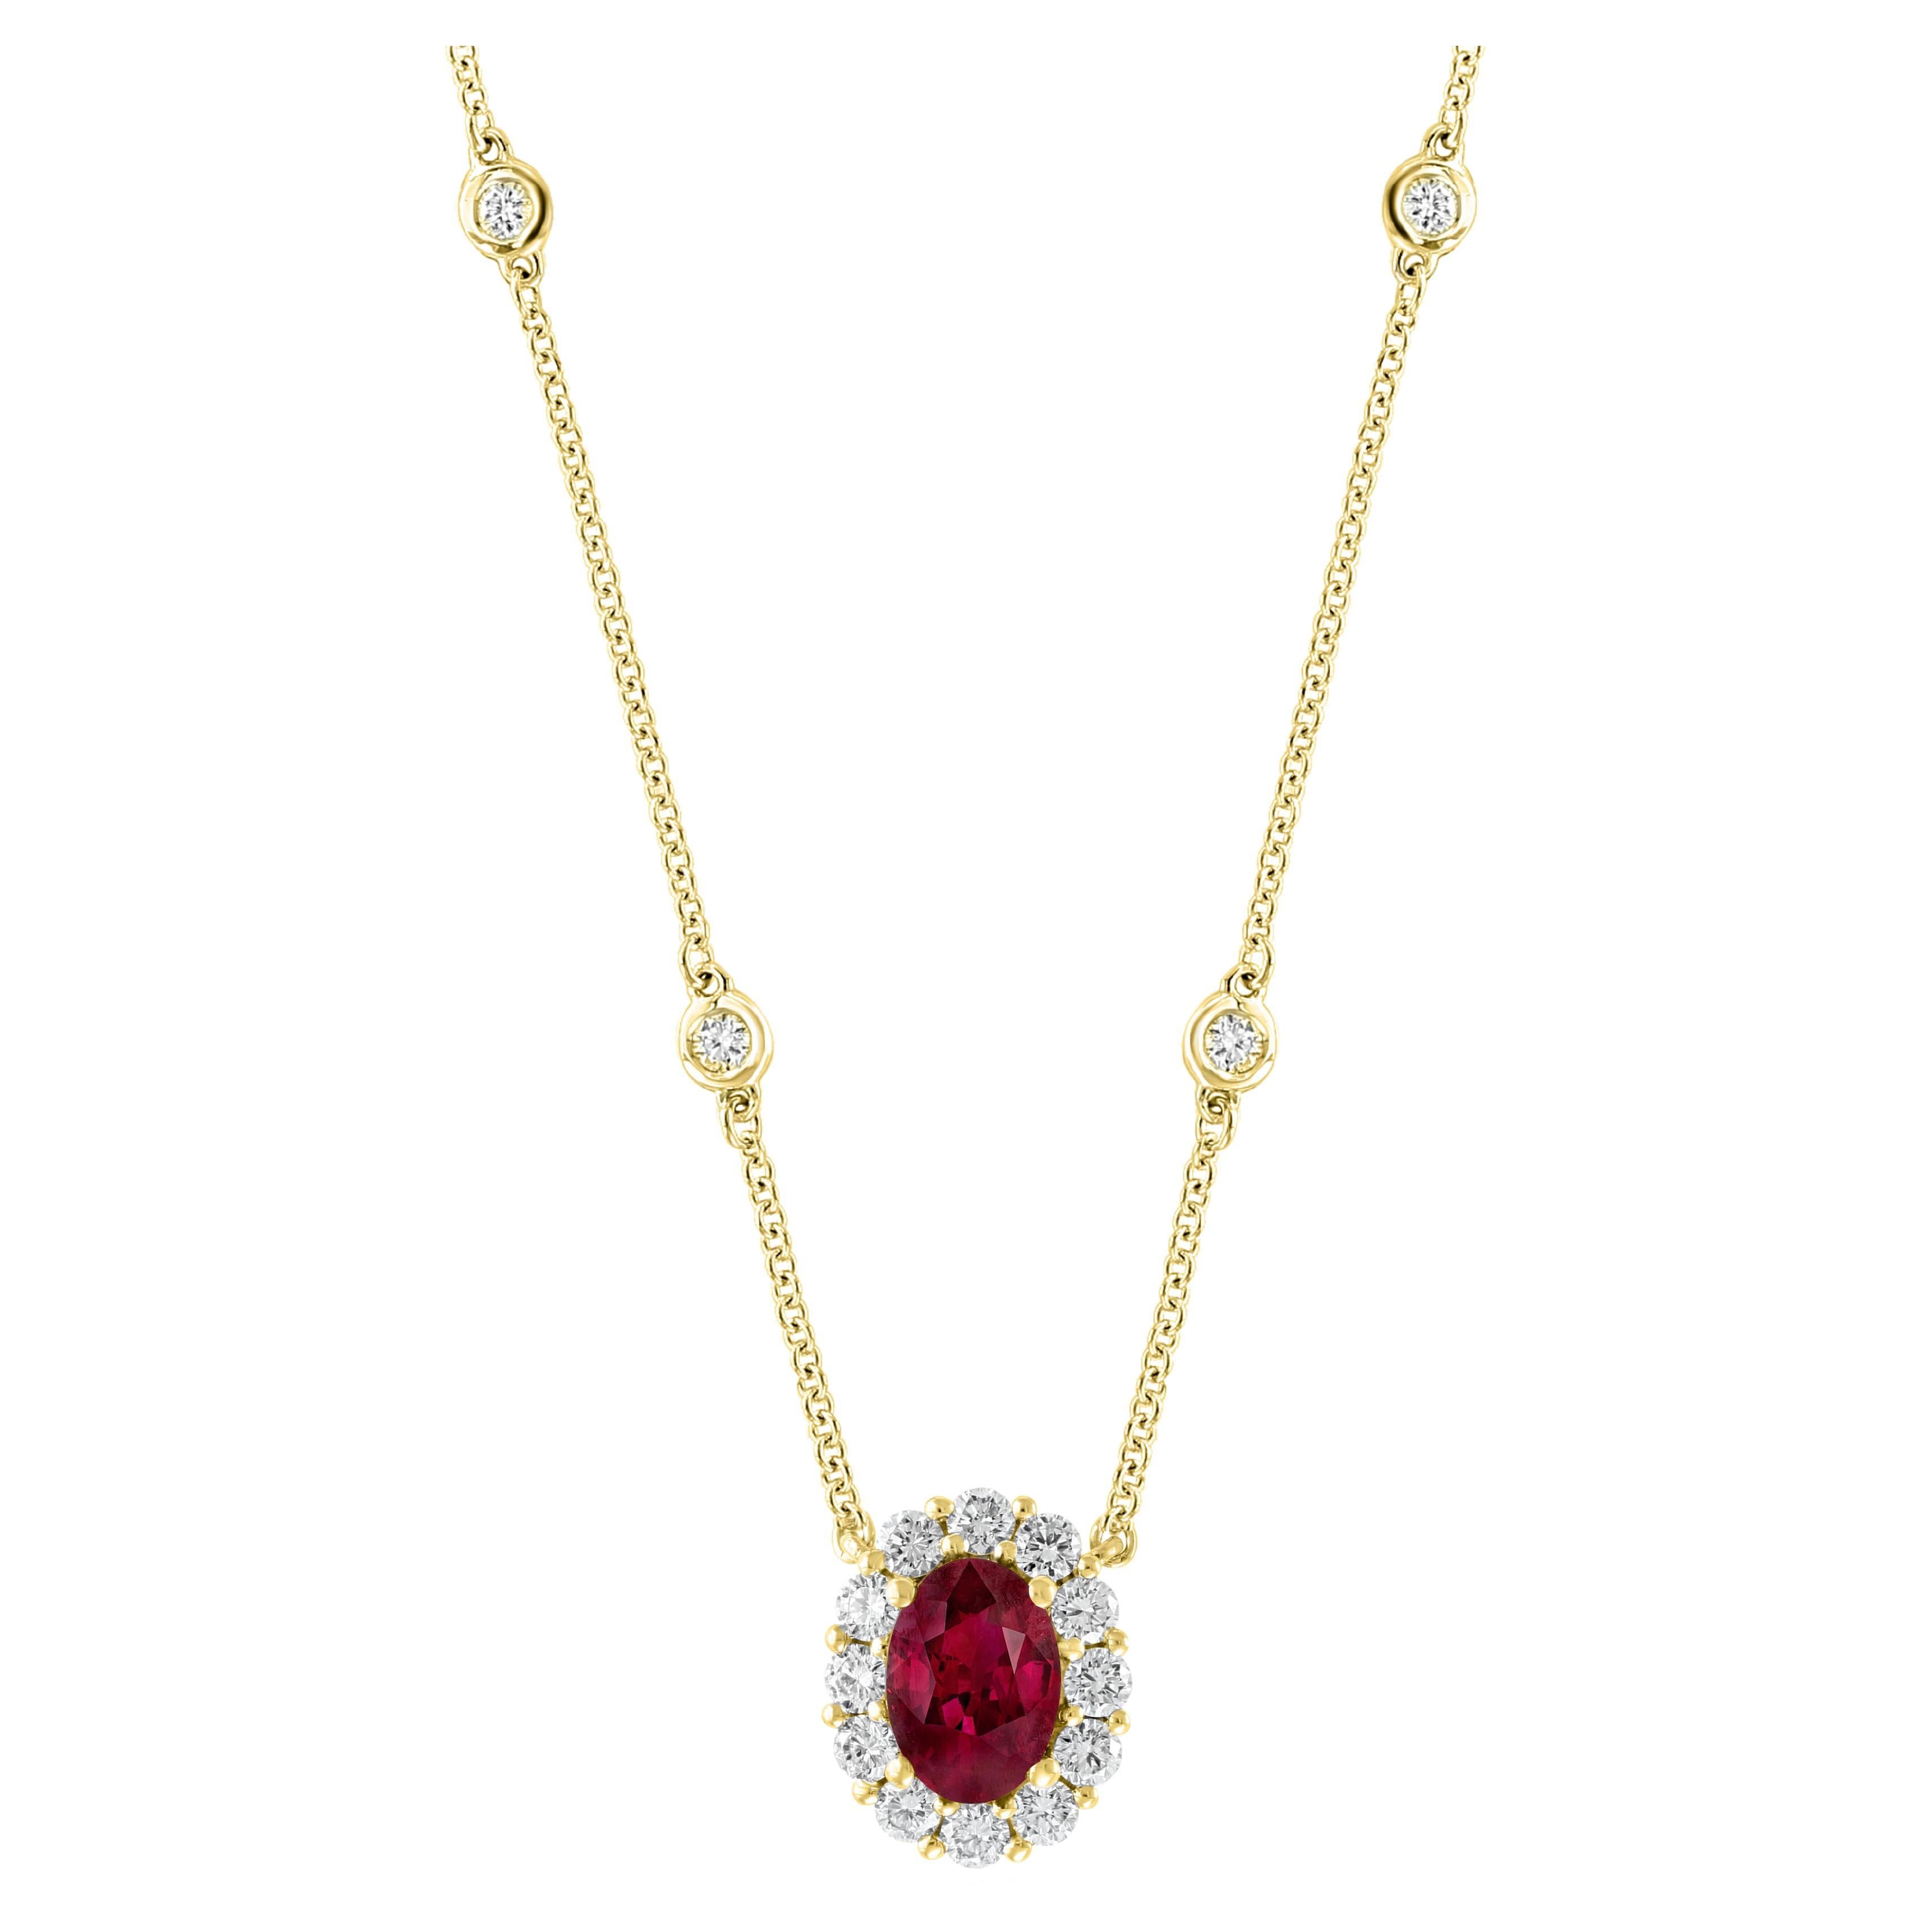 0.71 Carat Oval Cut Ruby and Diamond Pendant Necklace in 14K Yellow Gold For Sale